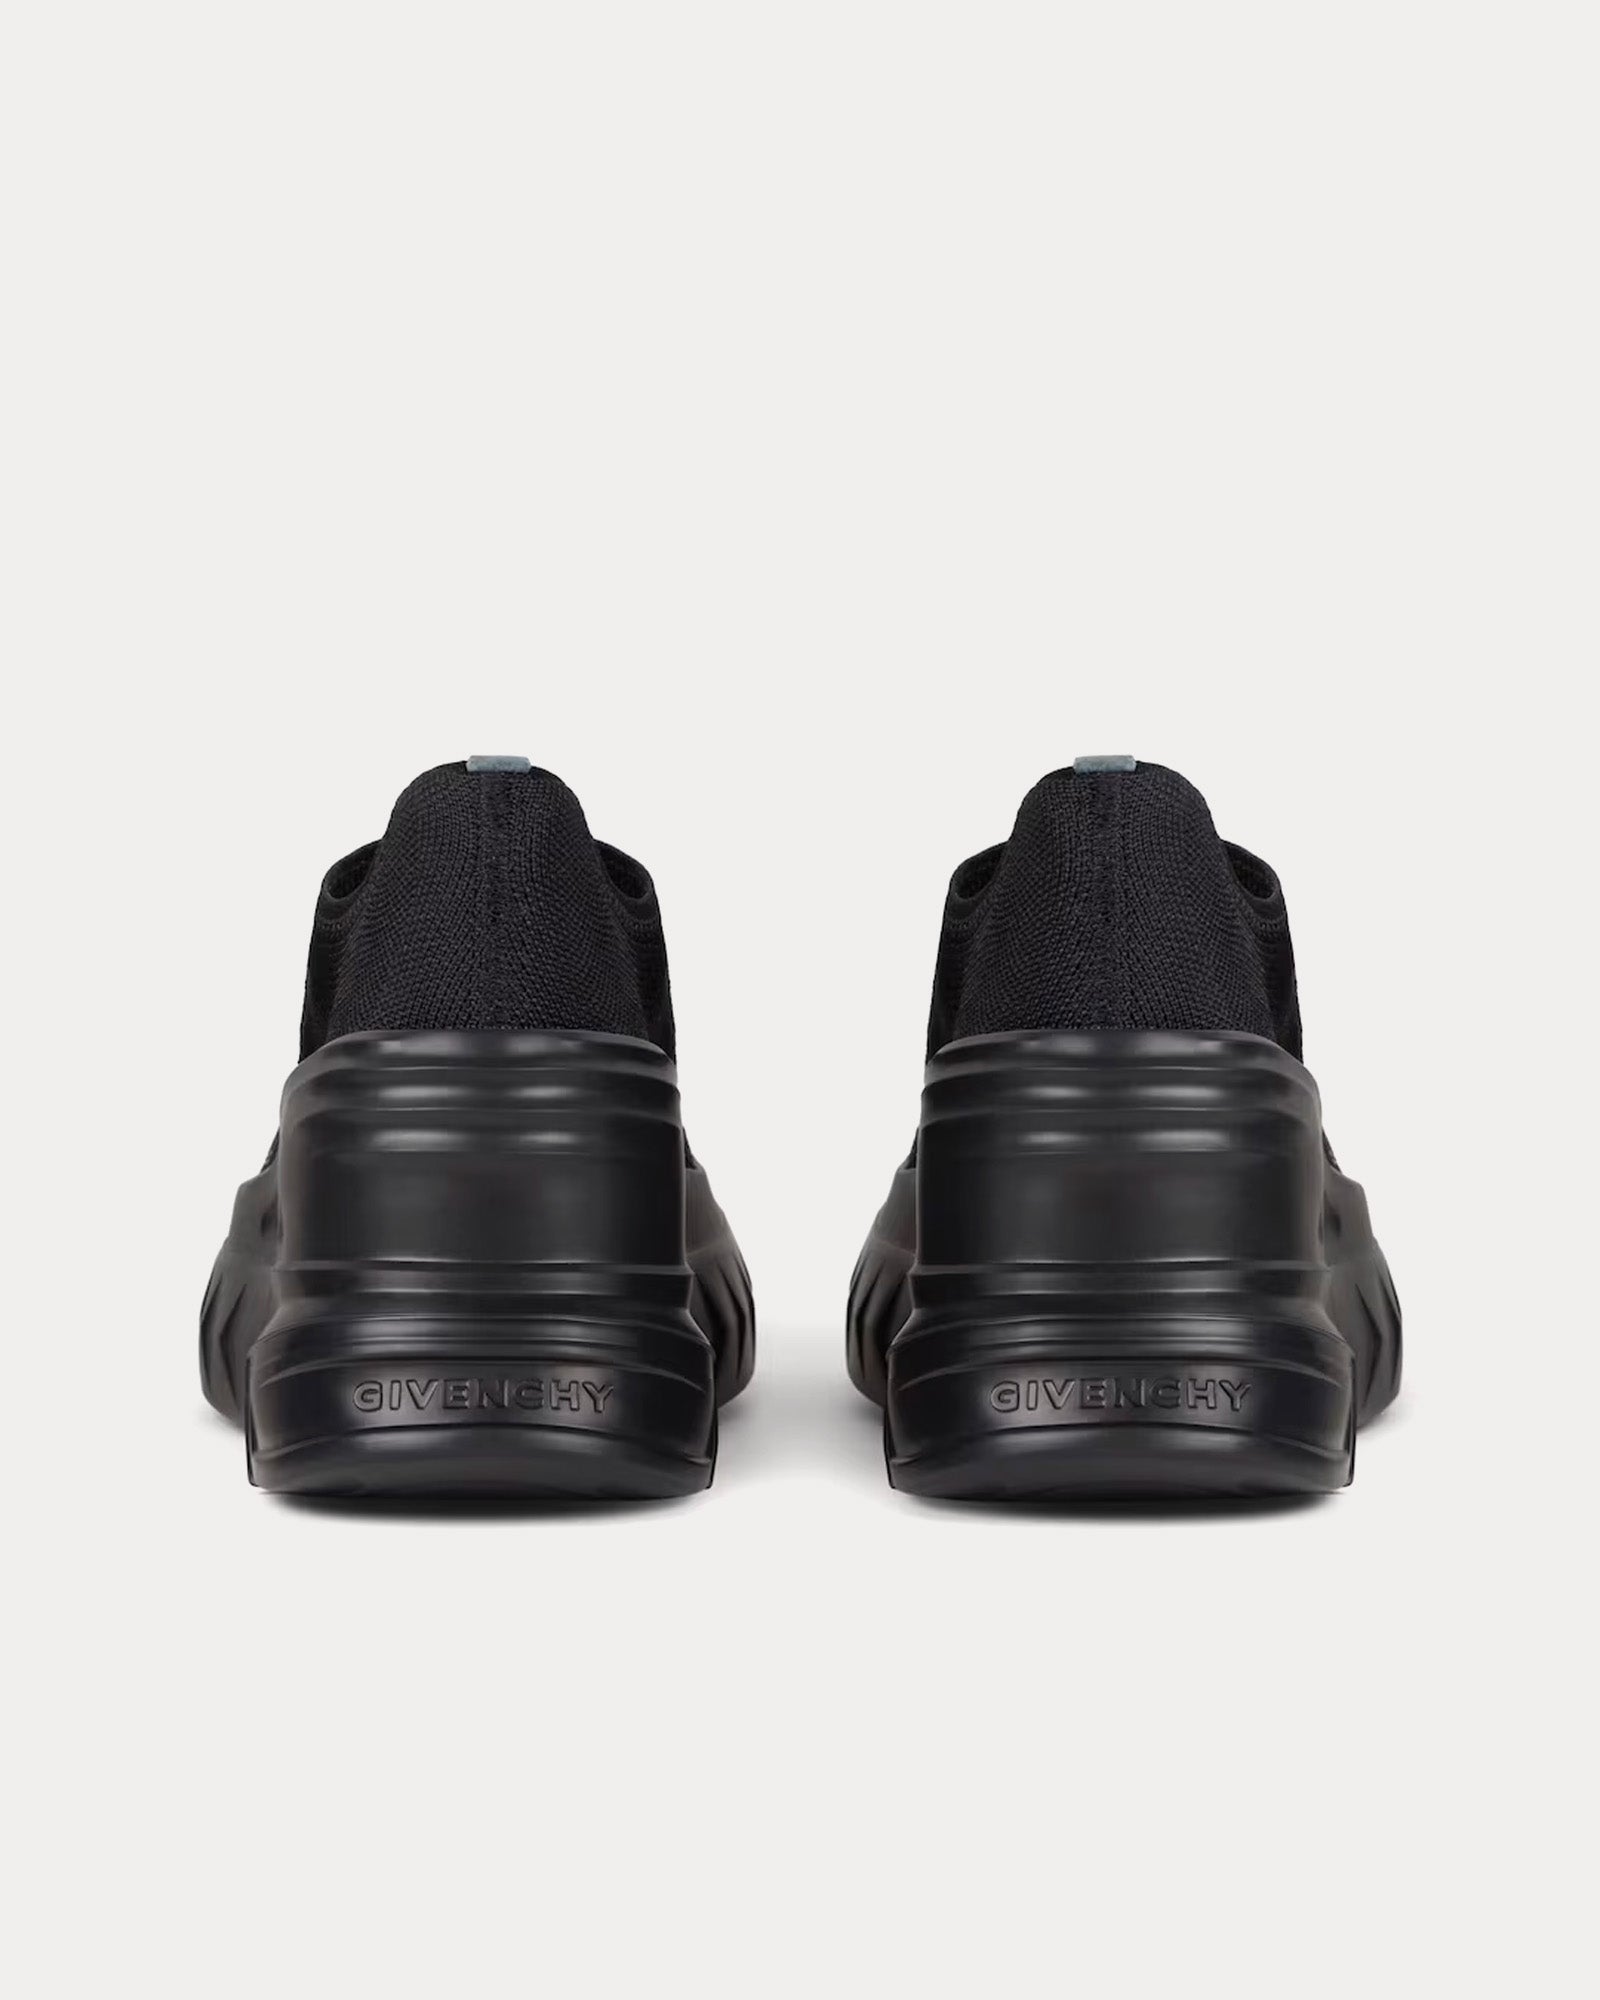 Givenchy - Marshmallow Wedge Rubber & Knit Black Low Top Sneakers